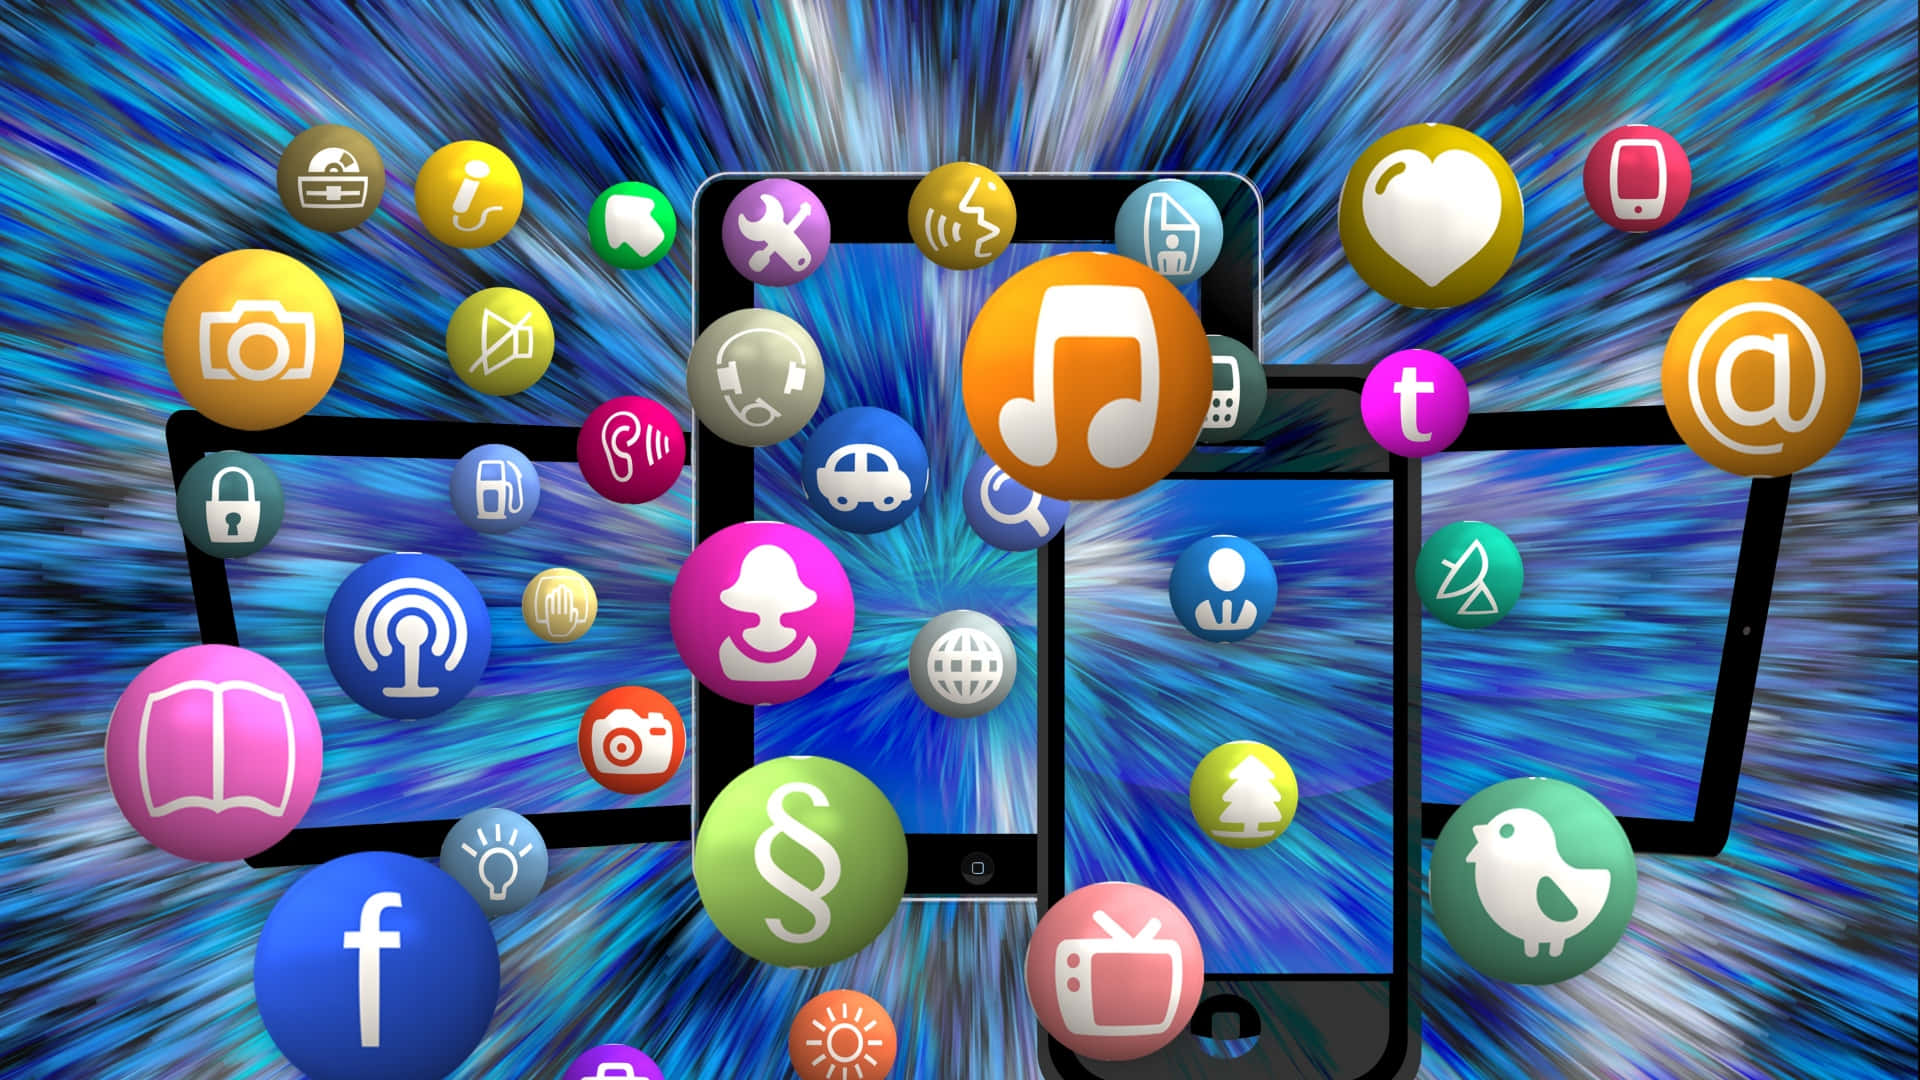 A Blurry Image Of Many Mobile Phones With Social Icons